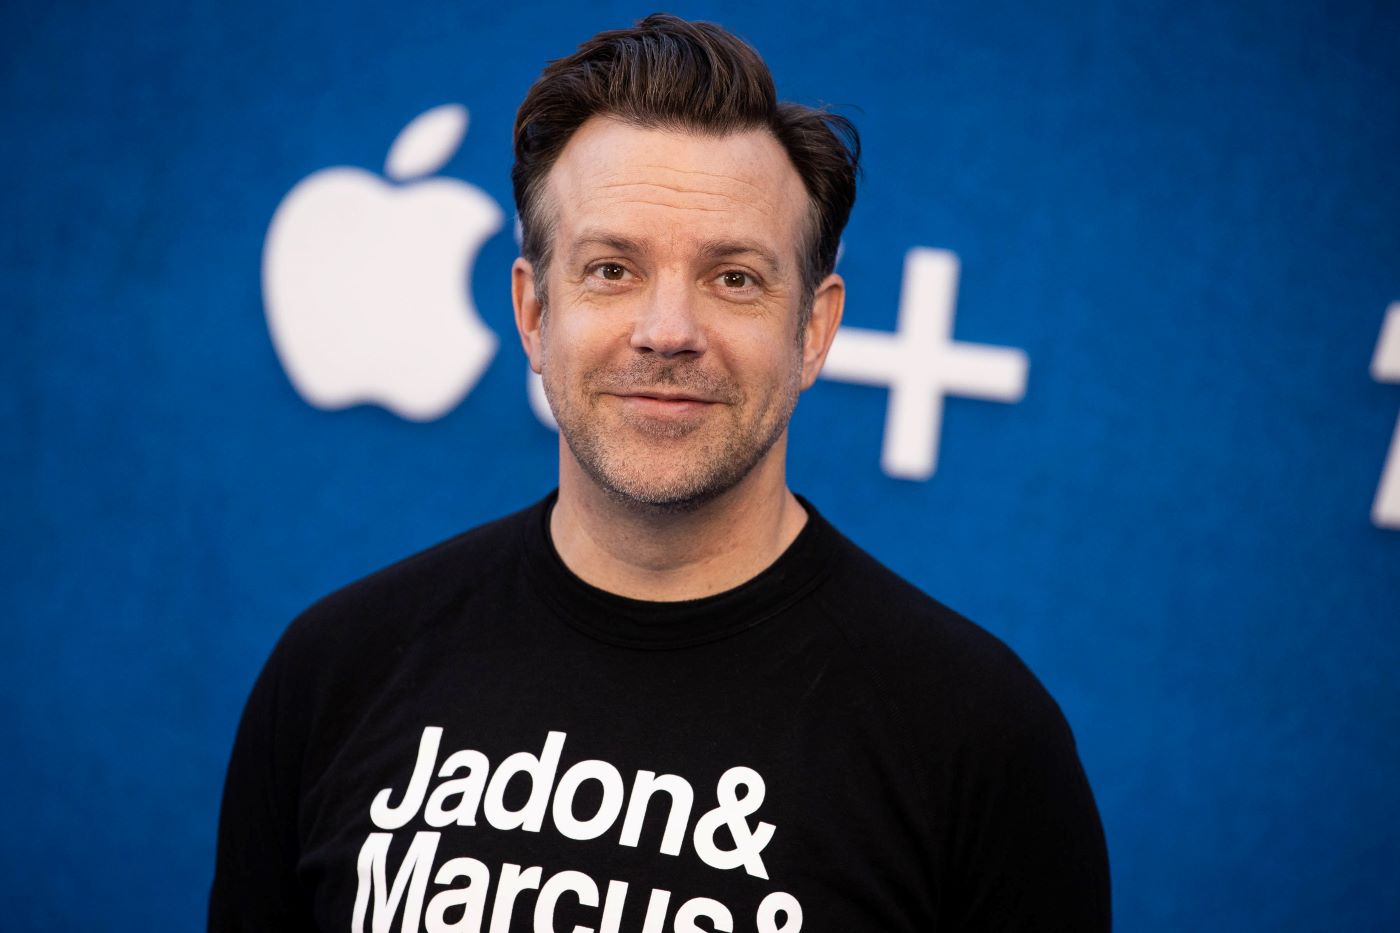 Jason Sudeikis from Ted Lasso wearing a black shirt with white writing standing in front of a blue background